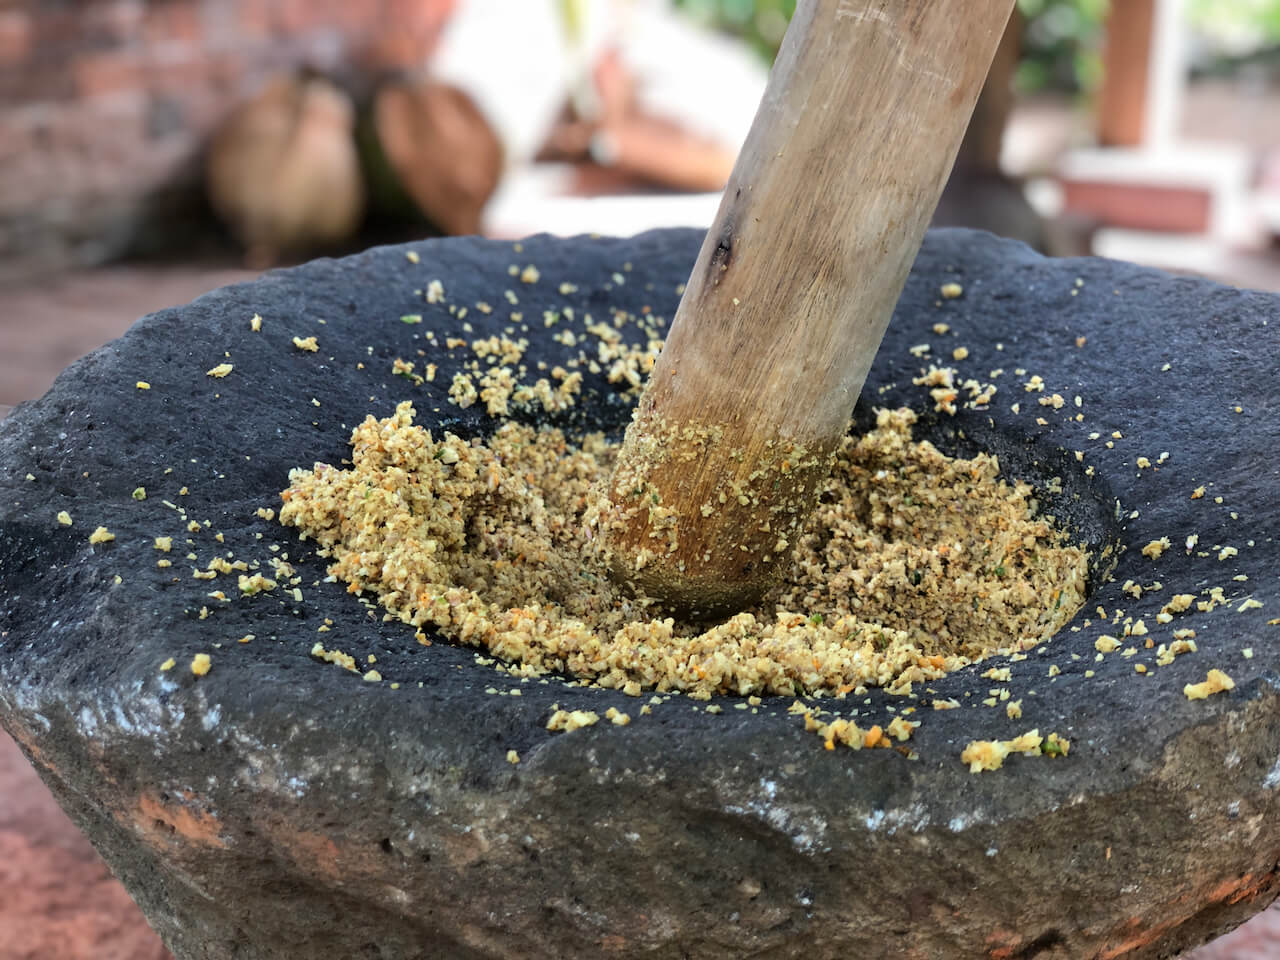 Pound your own spices in our mortar and pestle.